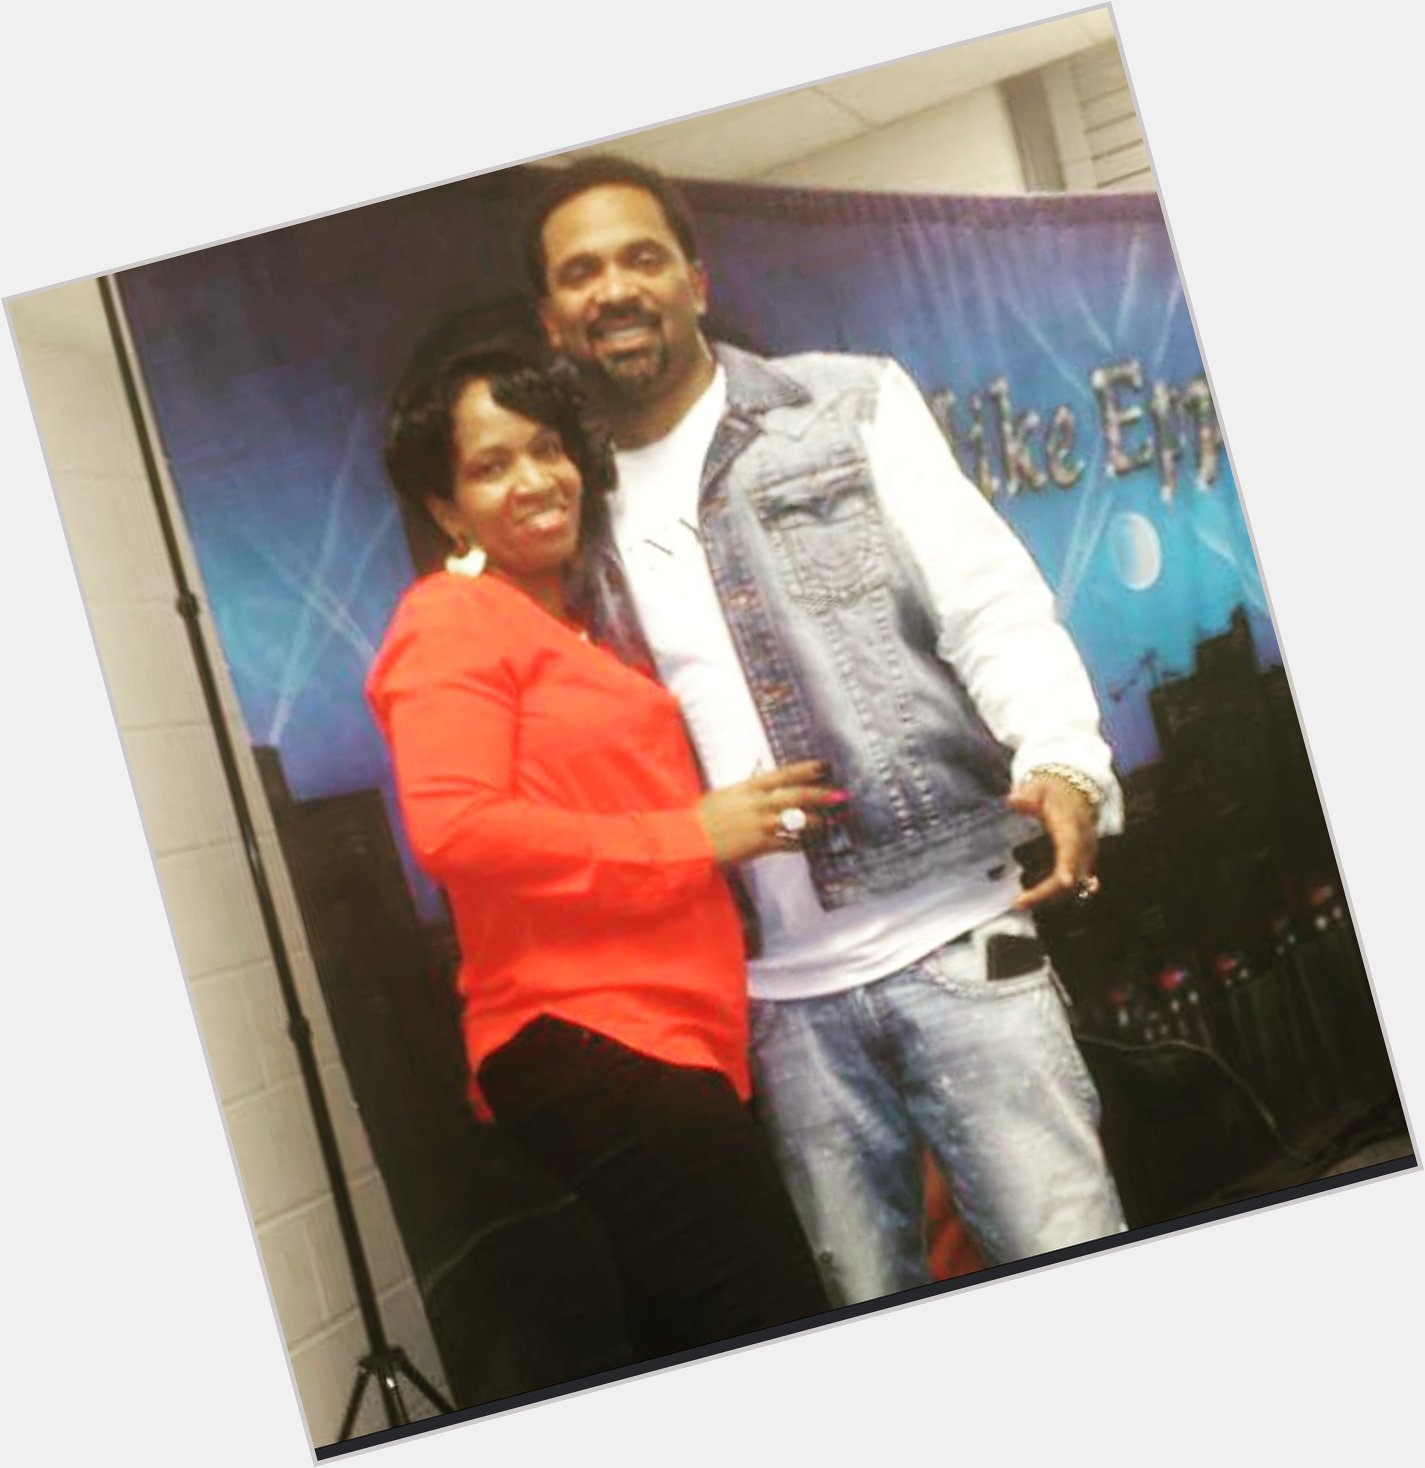 Gm World  .. I want give a Big Happy Birthday  shout out to.. Mike Epps  